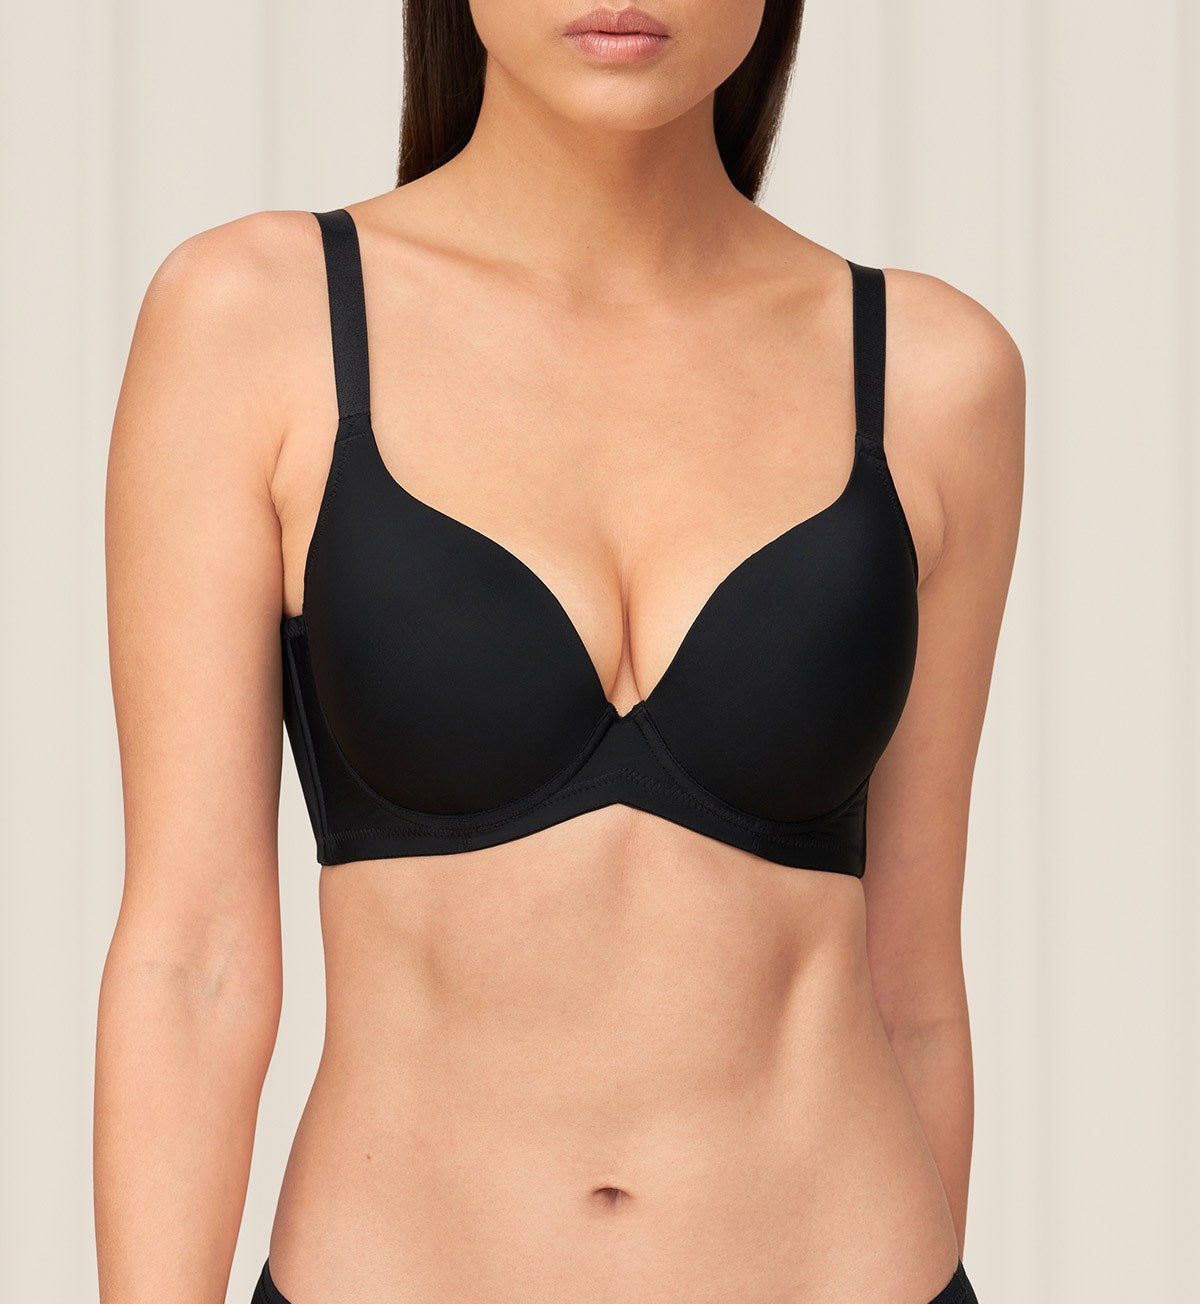 Simply Everyday Basic Wired Bra in Black Combination